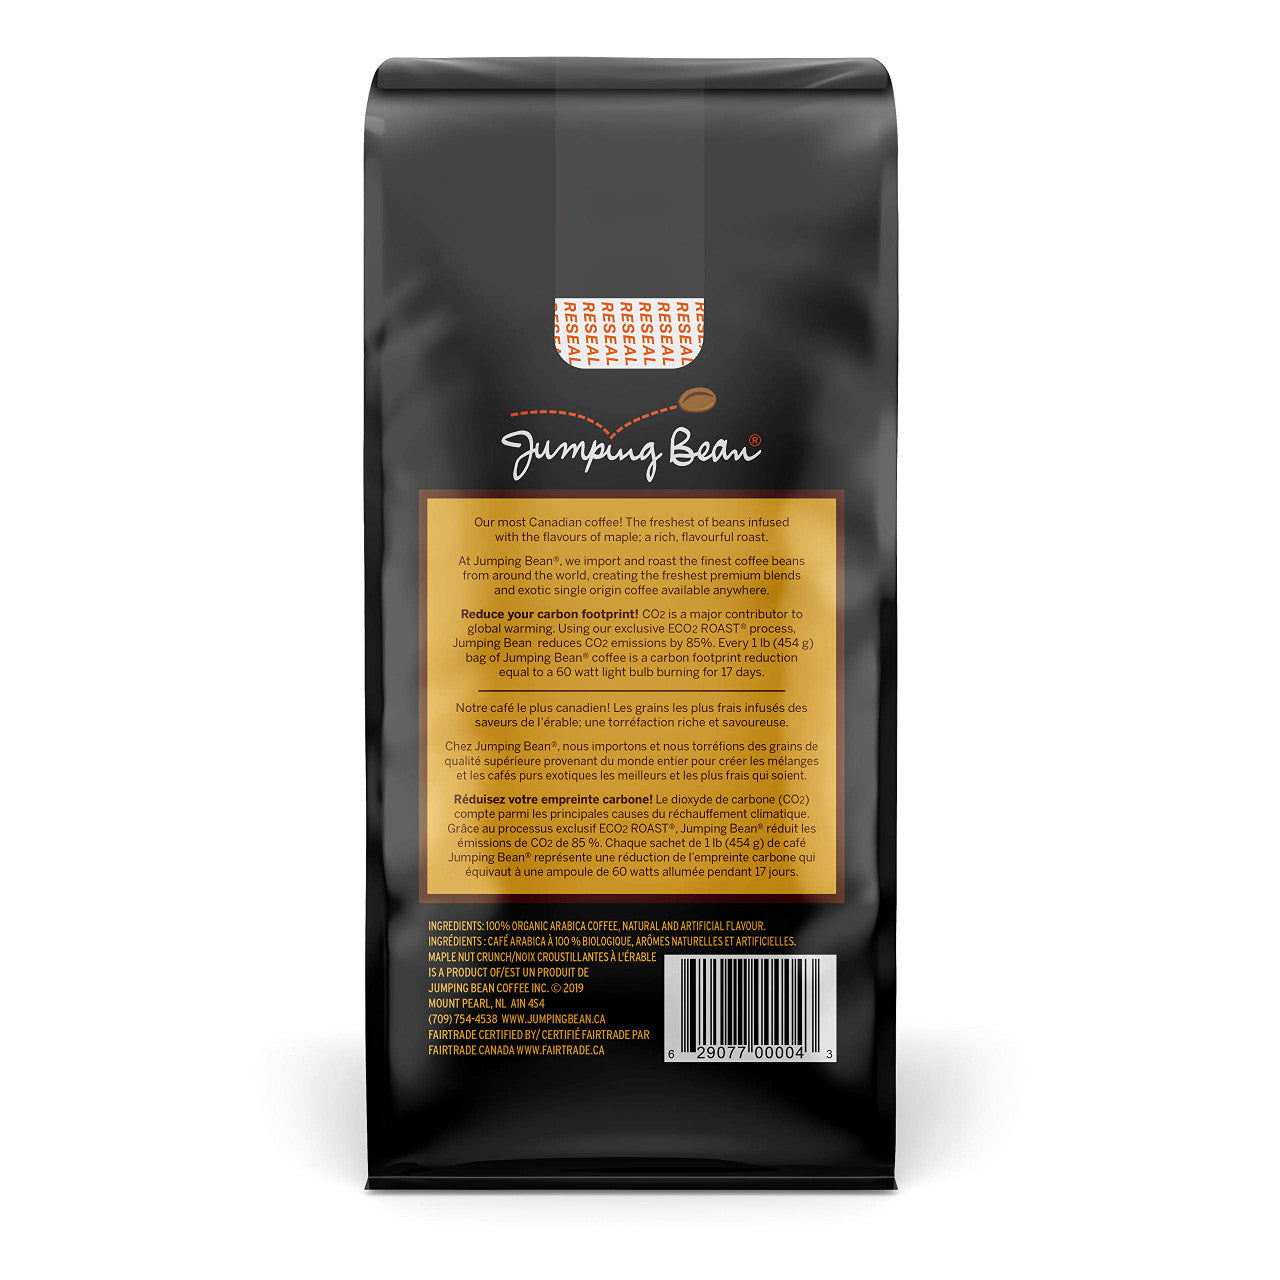 Jumping Bean Maple Flavored Whole Bean Coffee, Maple Nut Crunch Flavored Coffee, 454g/1lb., {Imported from Canada}